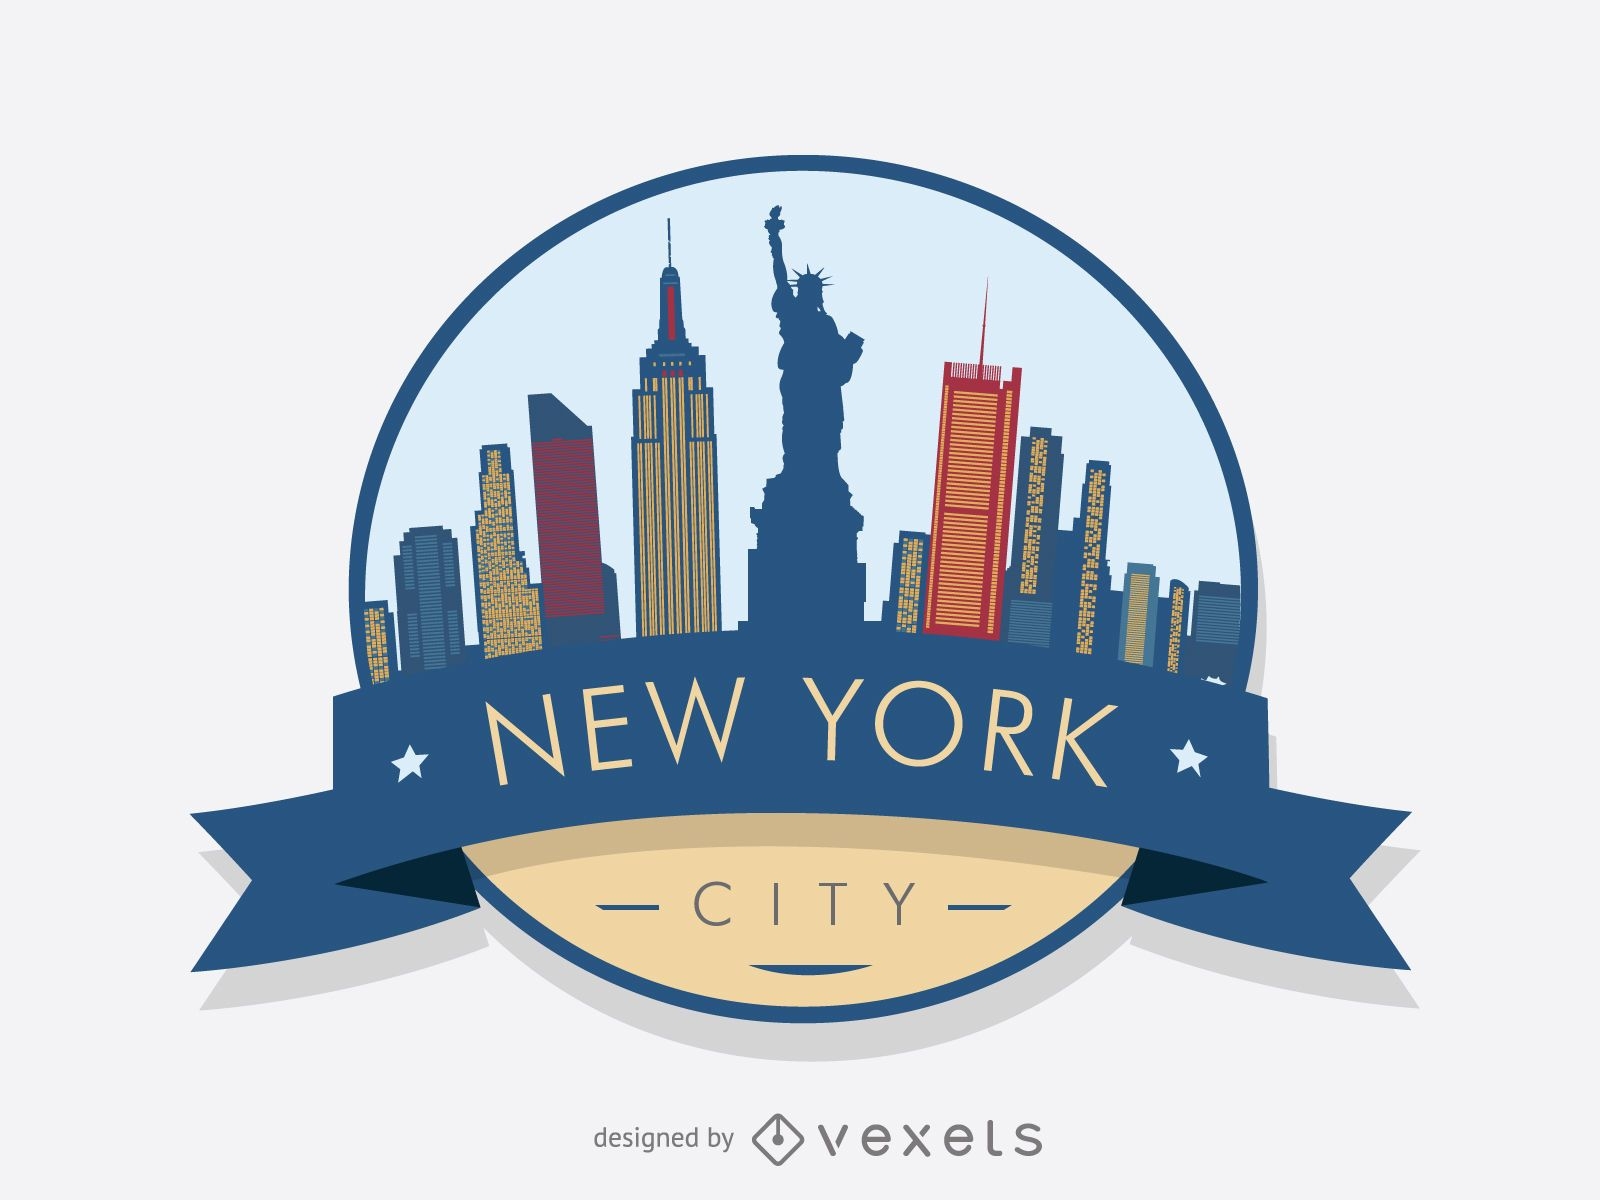 https://images.vexels.com/content/143728/preview/new-york-skyline-badge-8a7e19.png